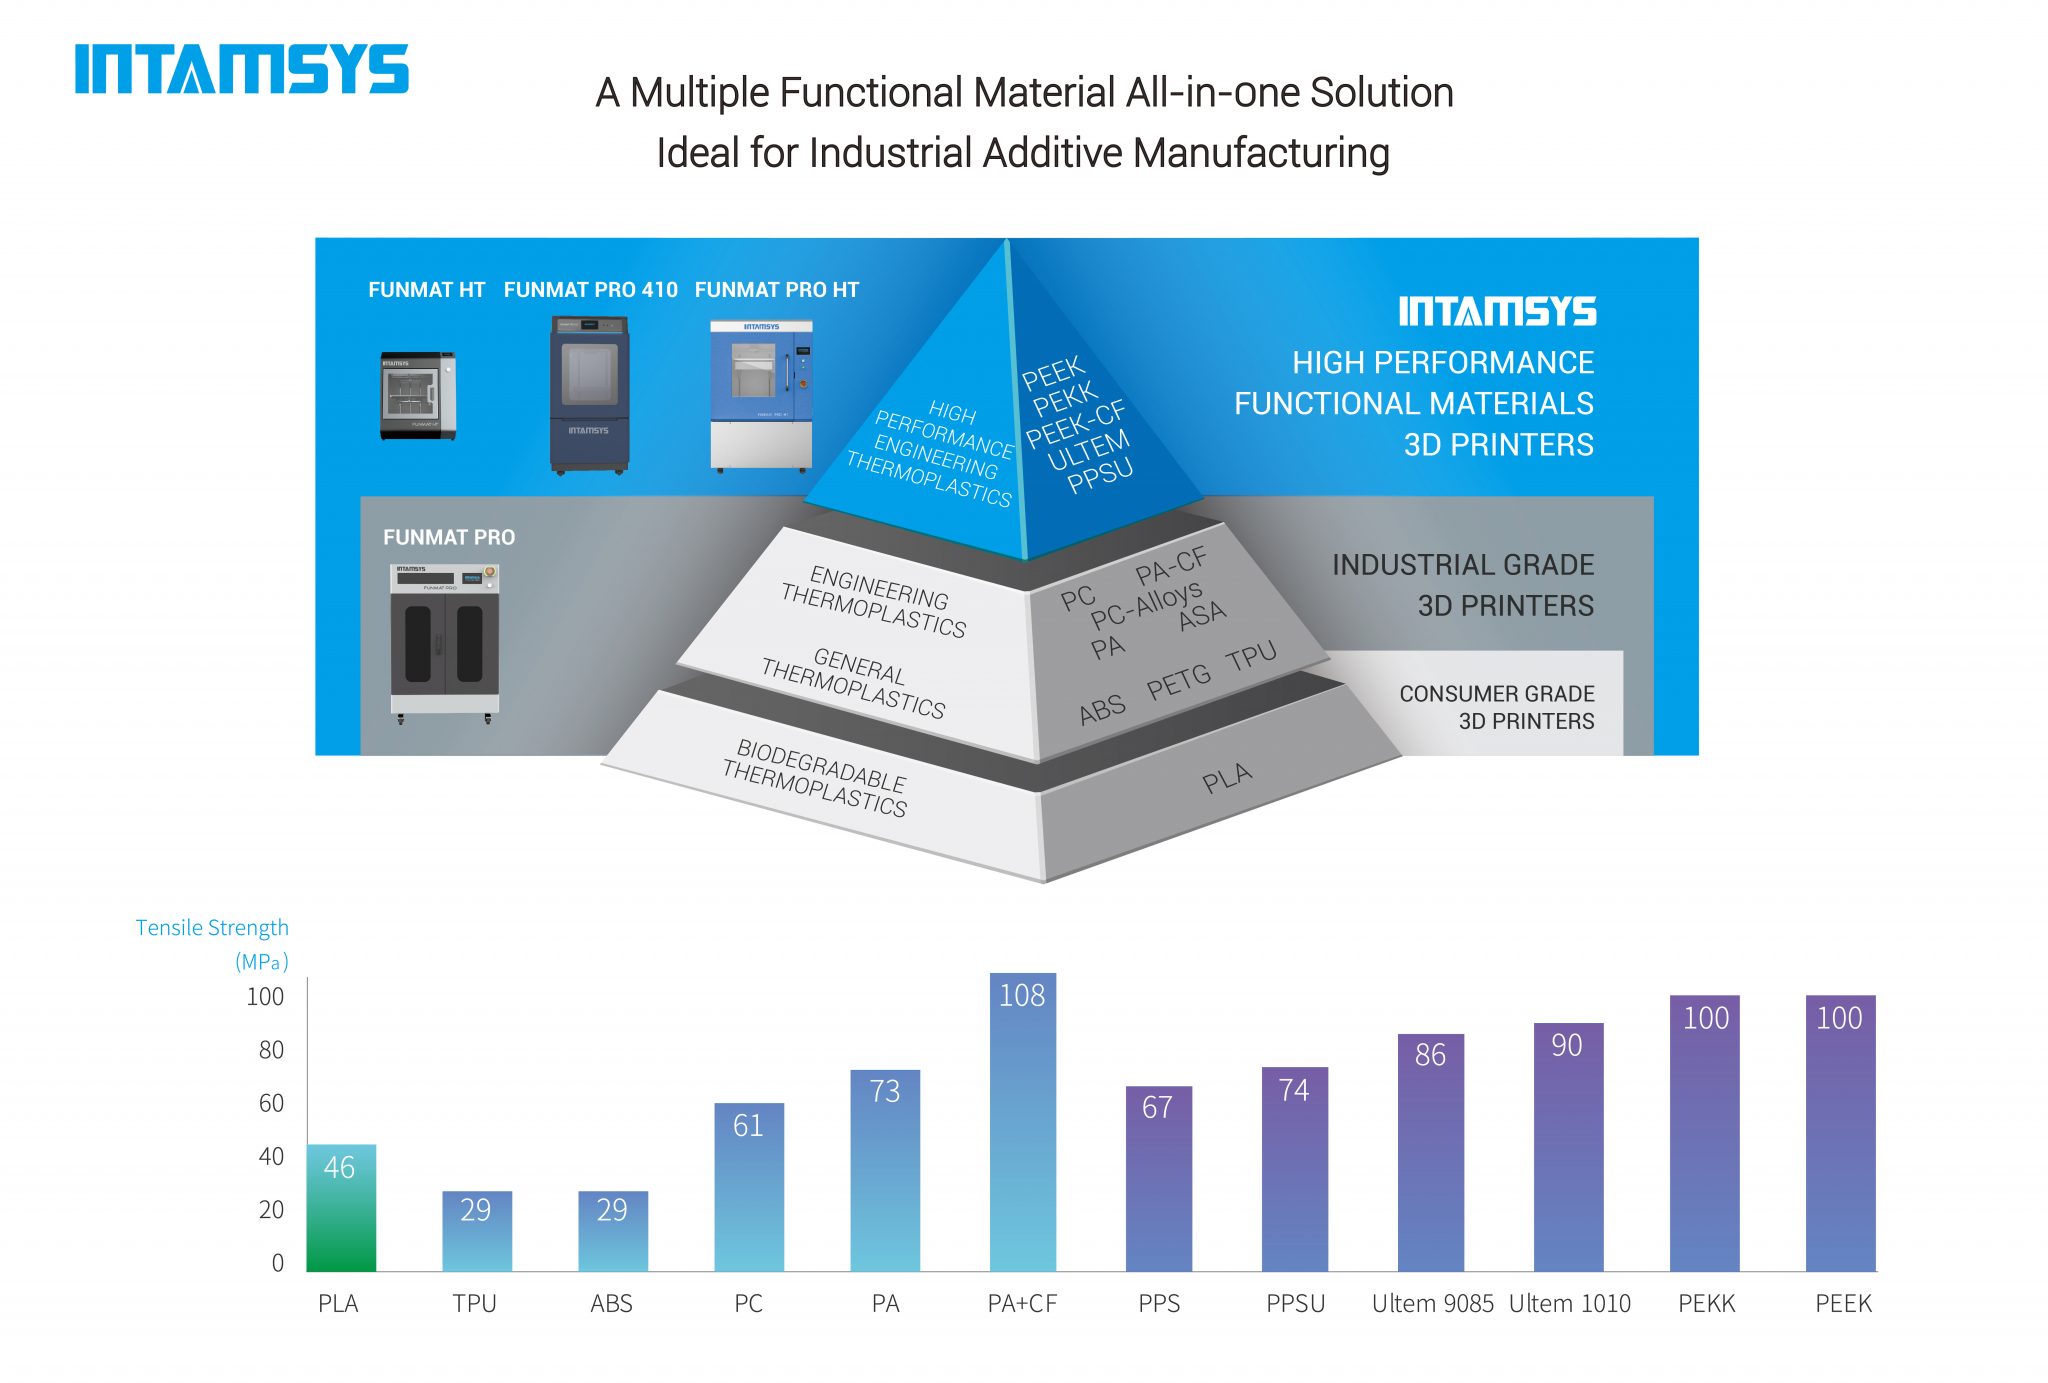 INTAMSYS high performance functional materials for 3D printing.